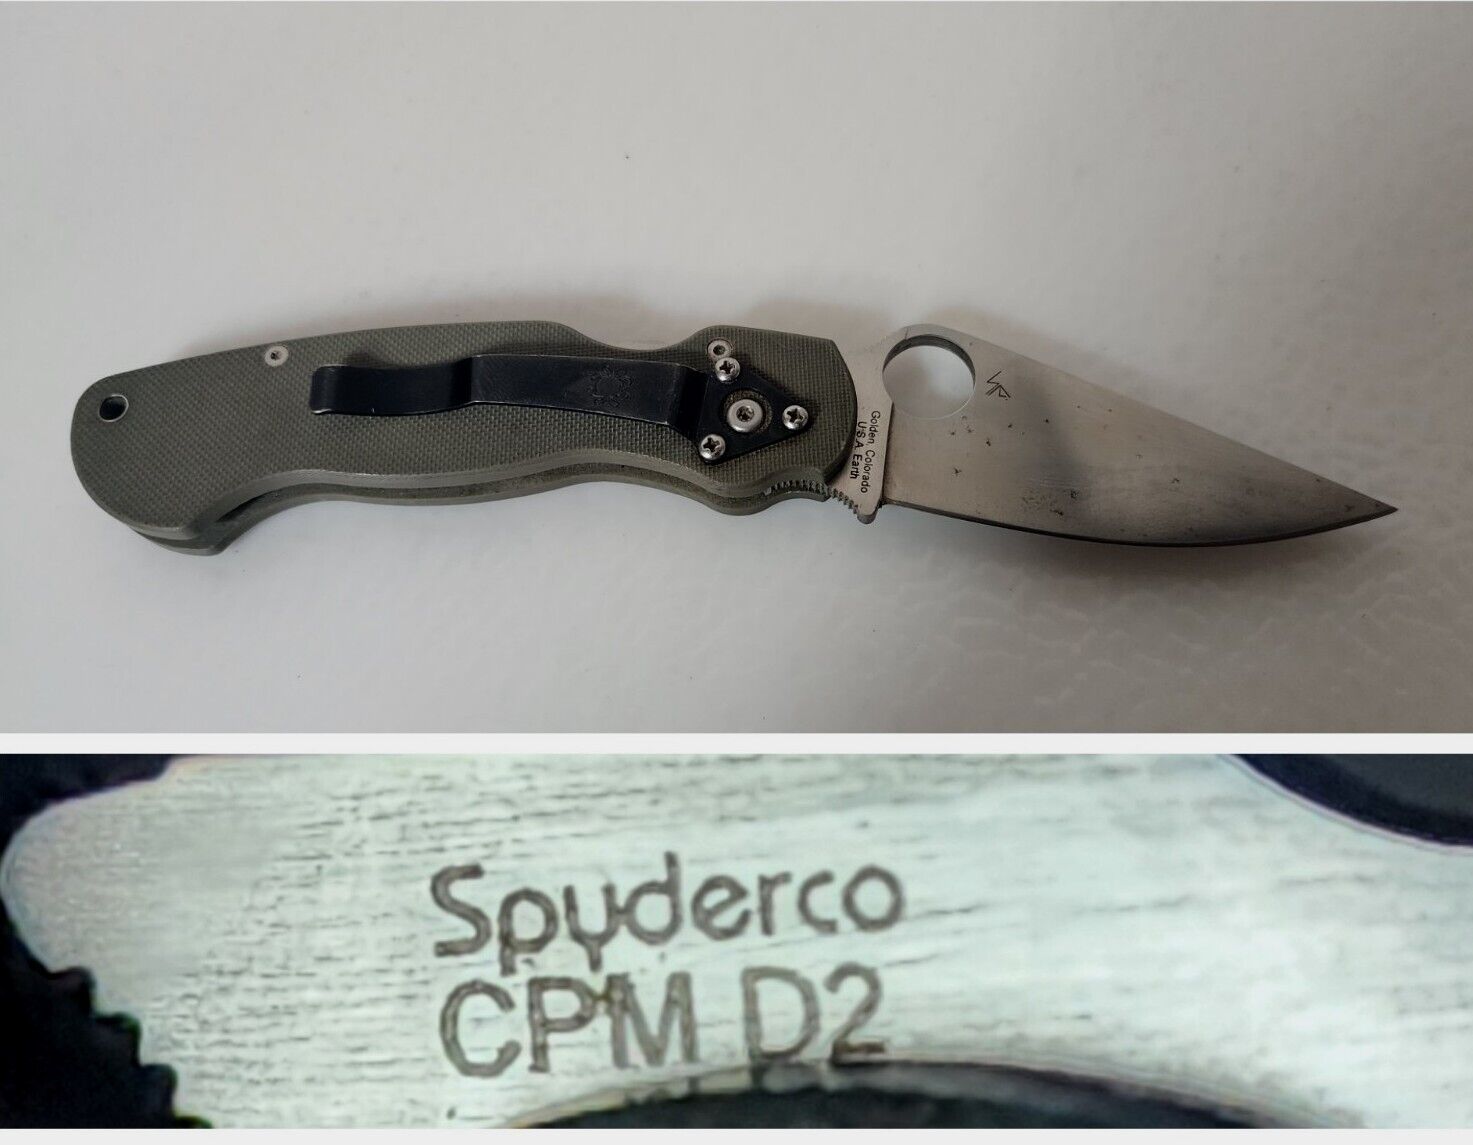 Very Rare* Spyderco CPM D2 (Collectors item) Made in USA